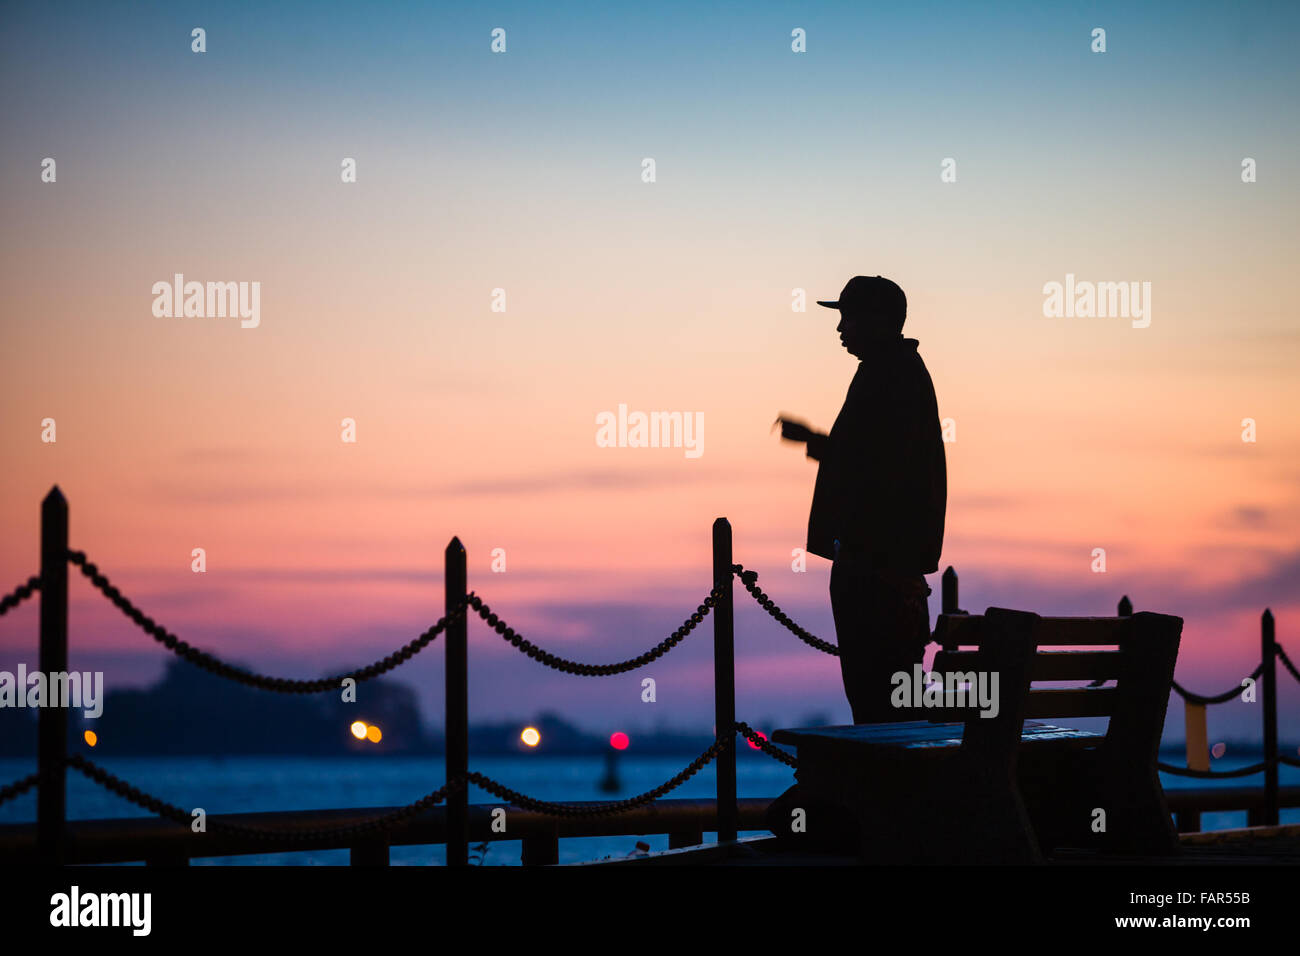 One man standing silhouetted against the sunset along the waterfront. Stock Photo